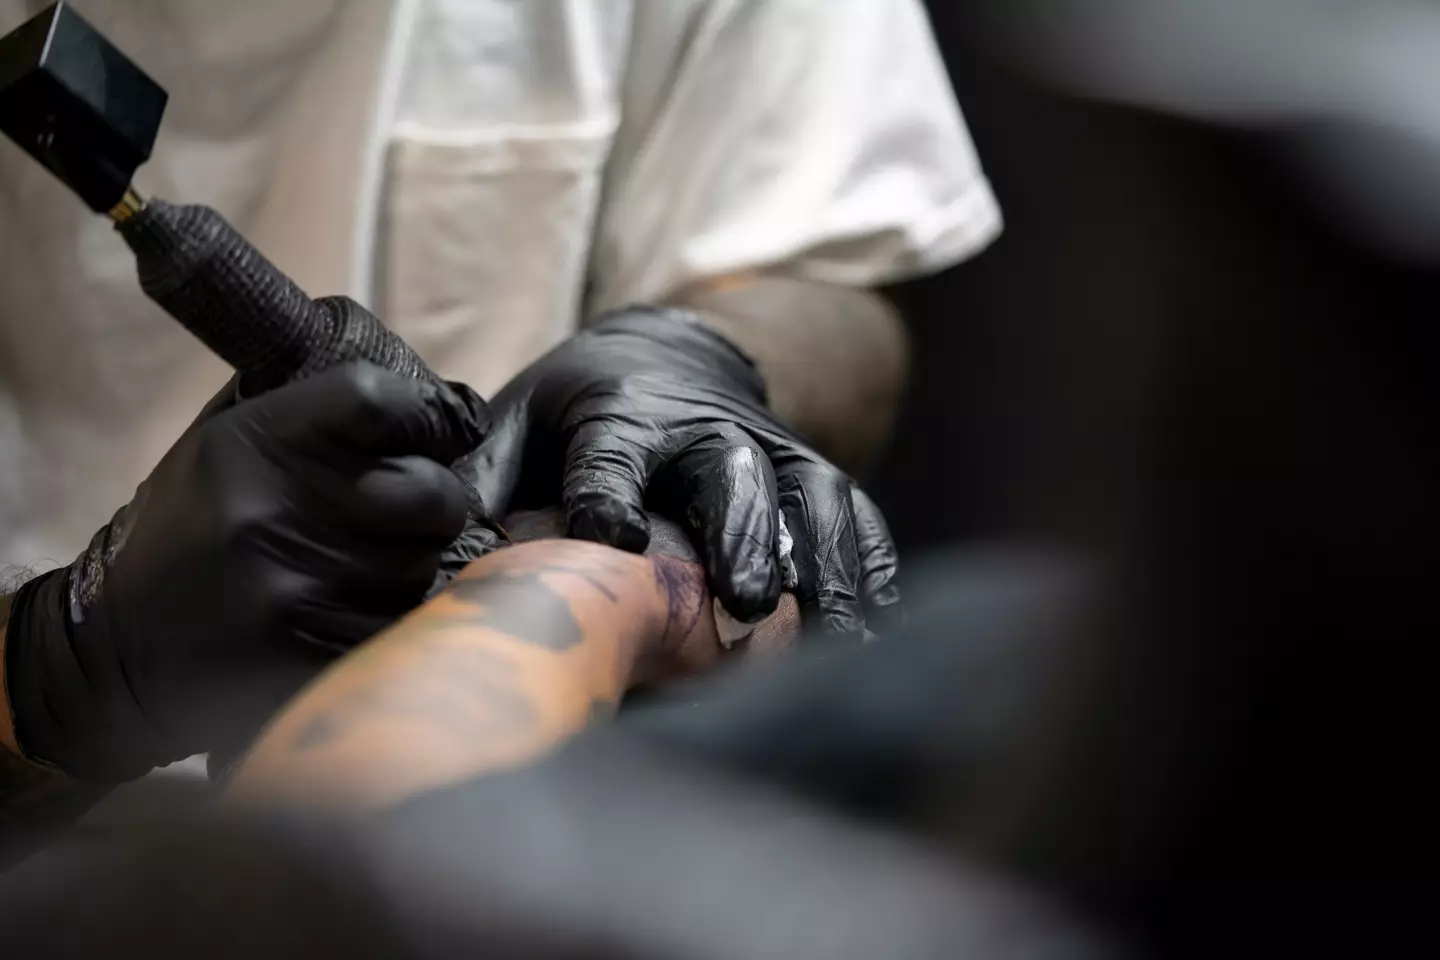 Want a free railcard? Well, you'll have to get a tattoo first.